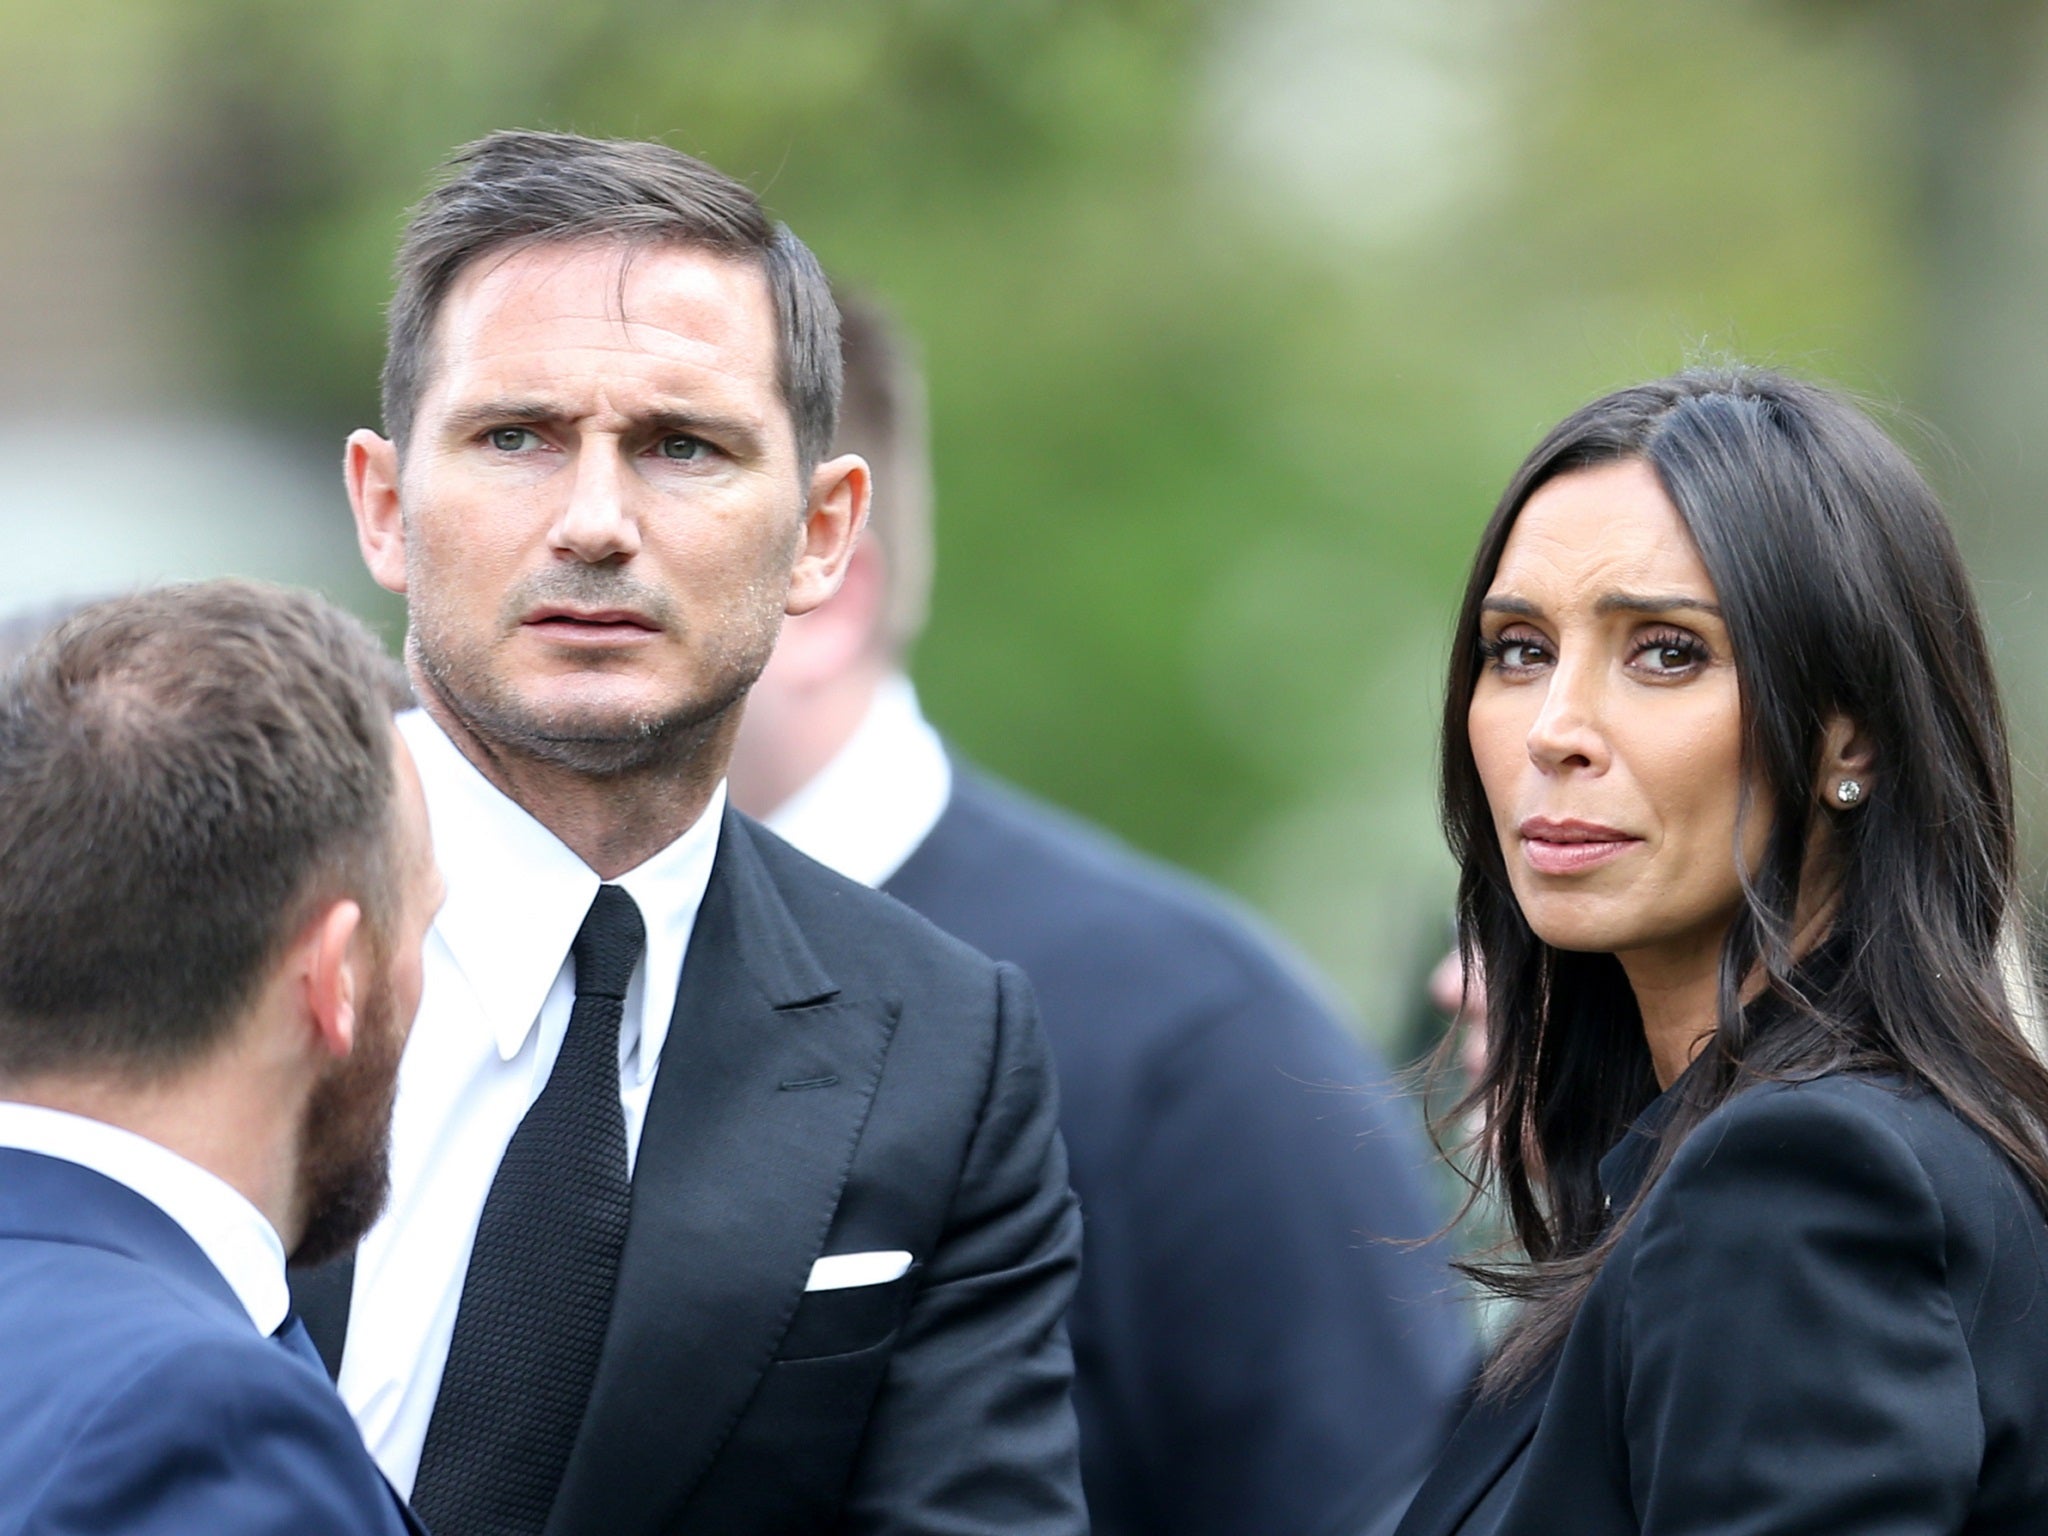 Mr Lampard told how his wife was horrified to see the stalker loitering at their front gate when he turned up unannounced at their home once